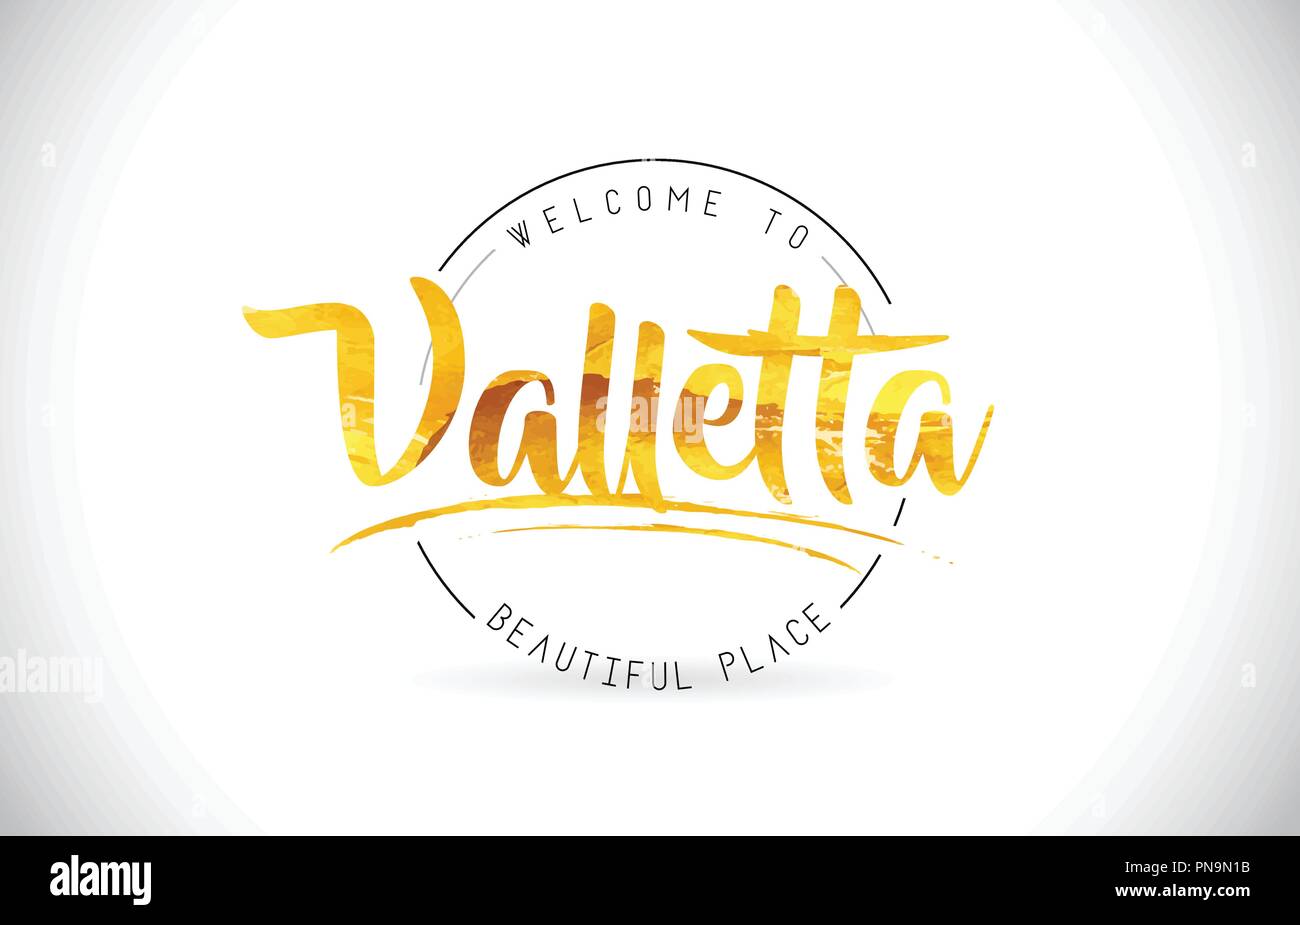 Valletta Welcome To Word Text with Handwritten Font and Golden Texture Design Illustration Vector. Stock Vector